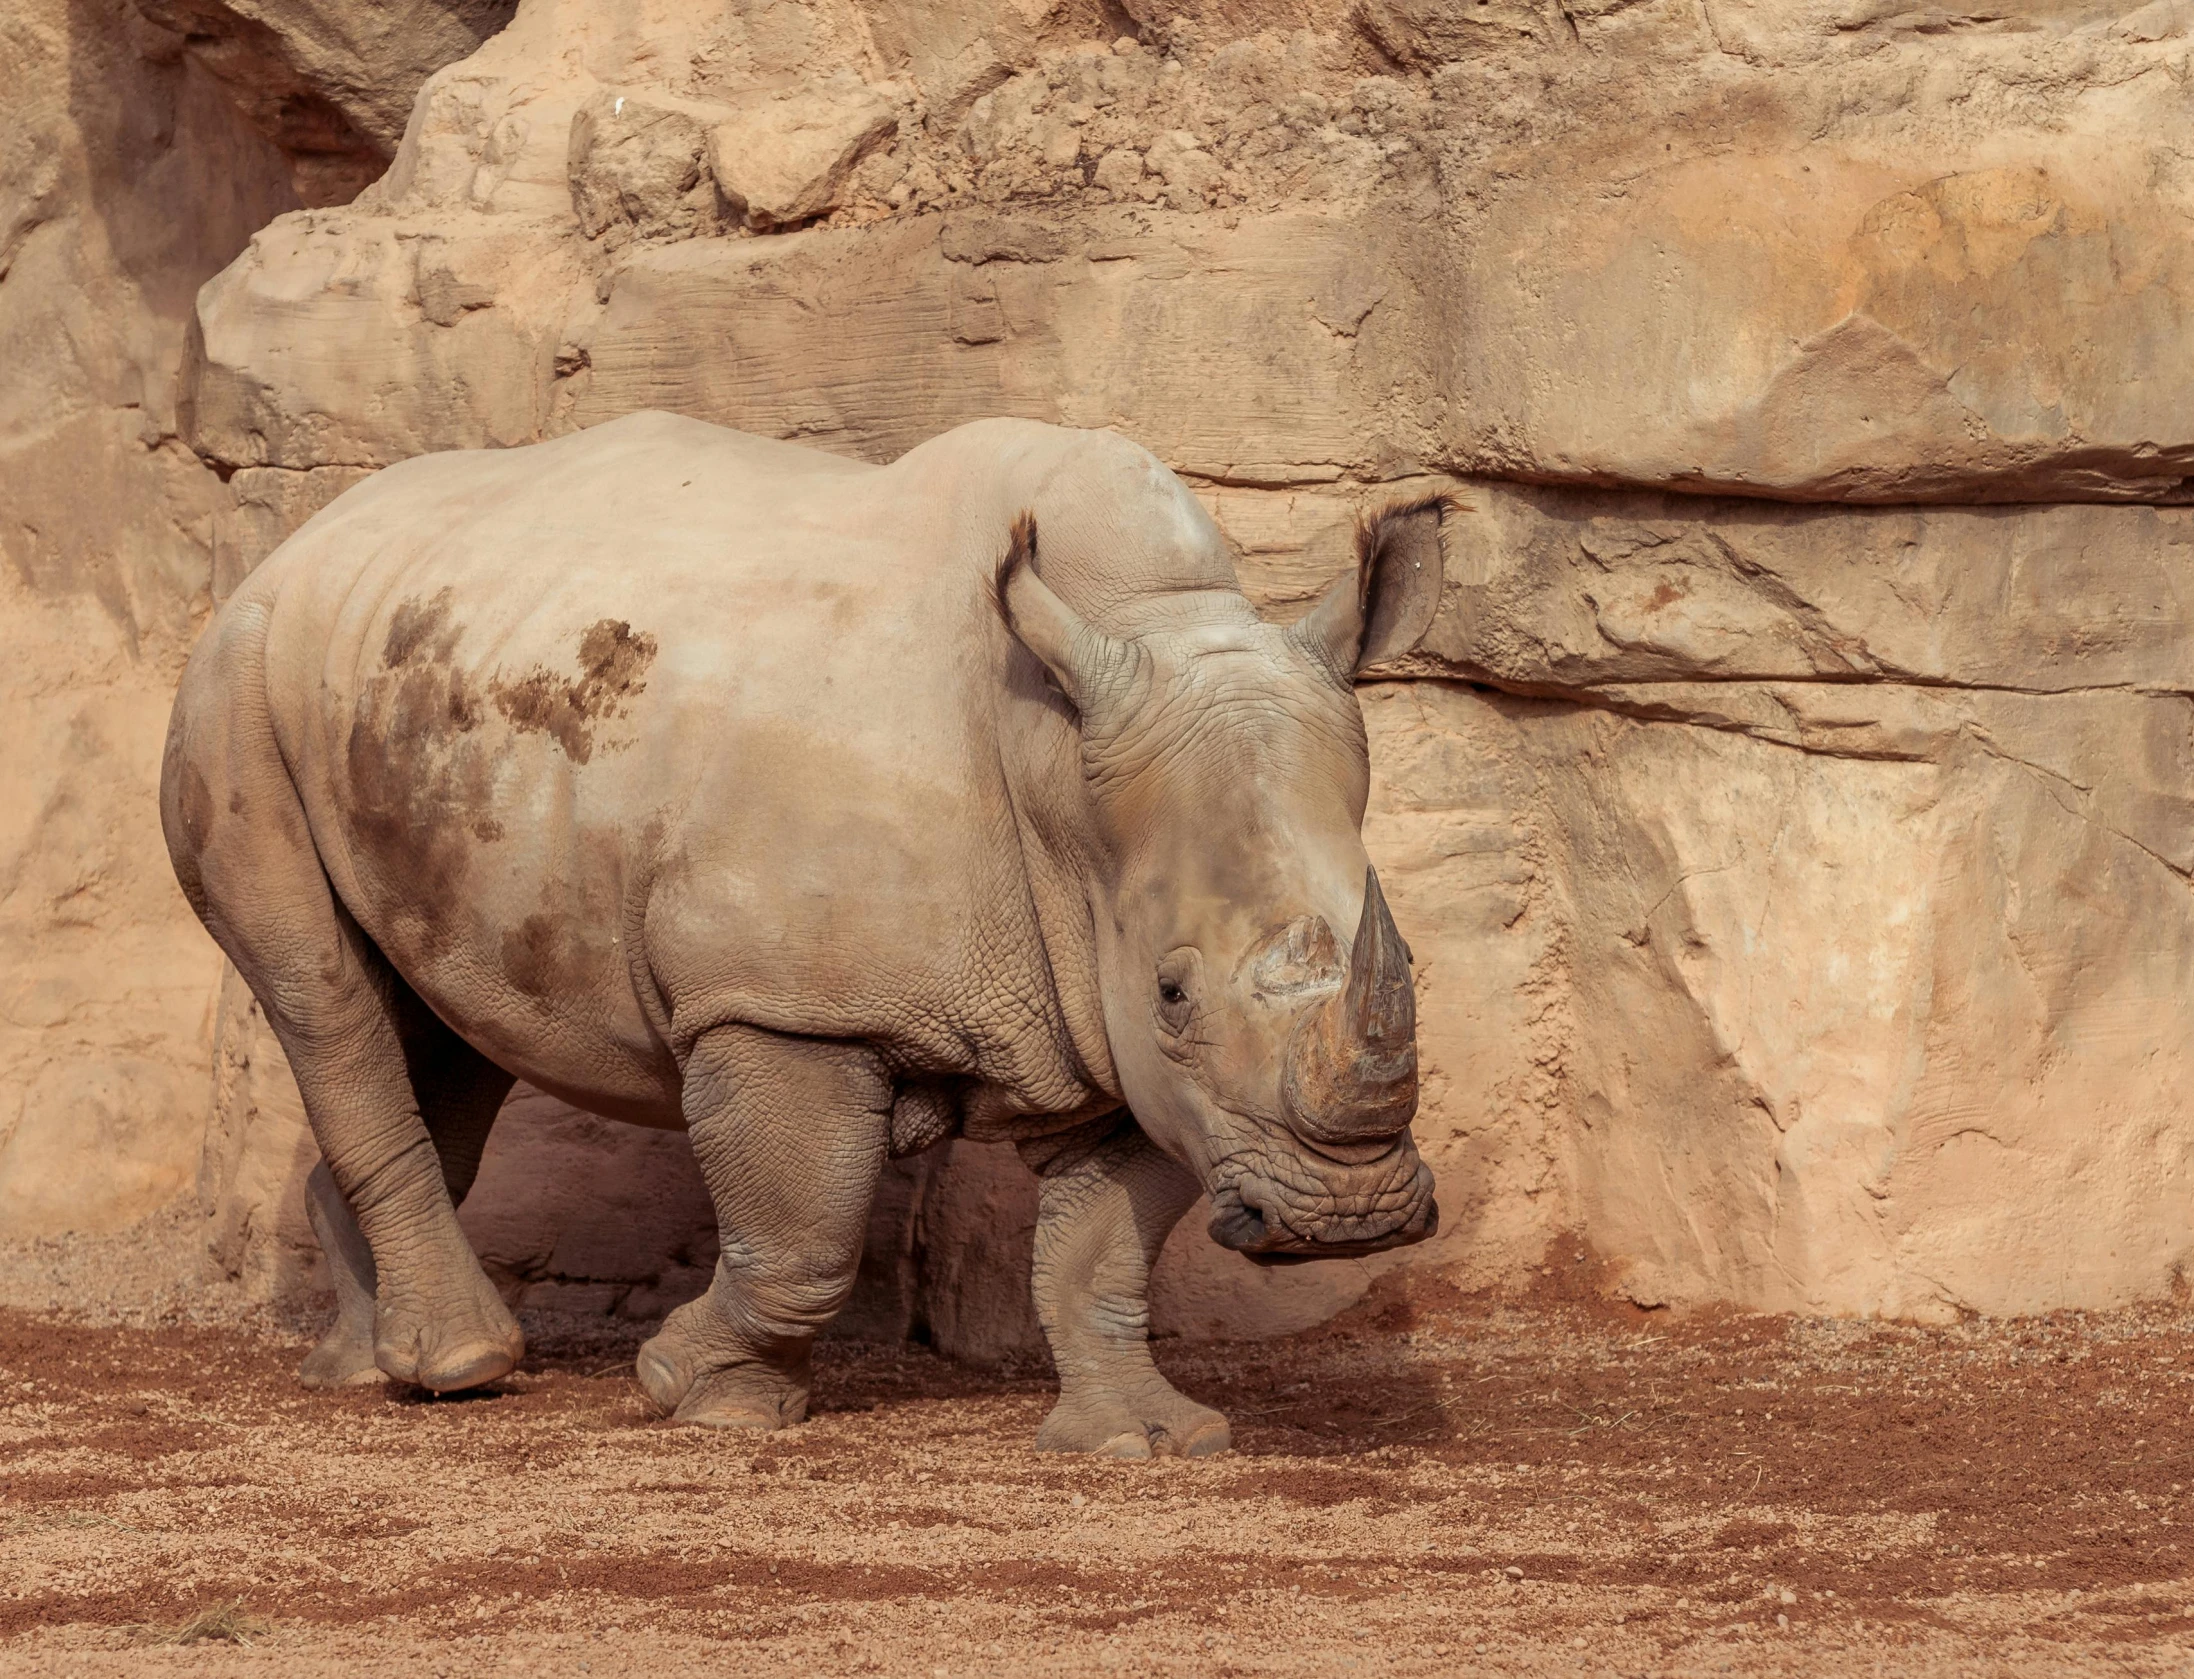 there is a baby rhino standing by the rocks